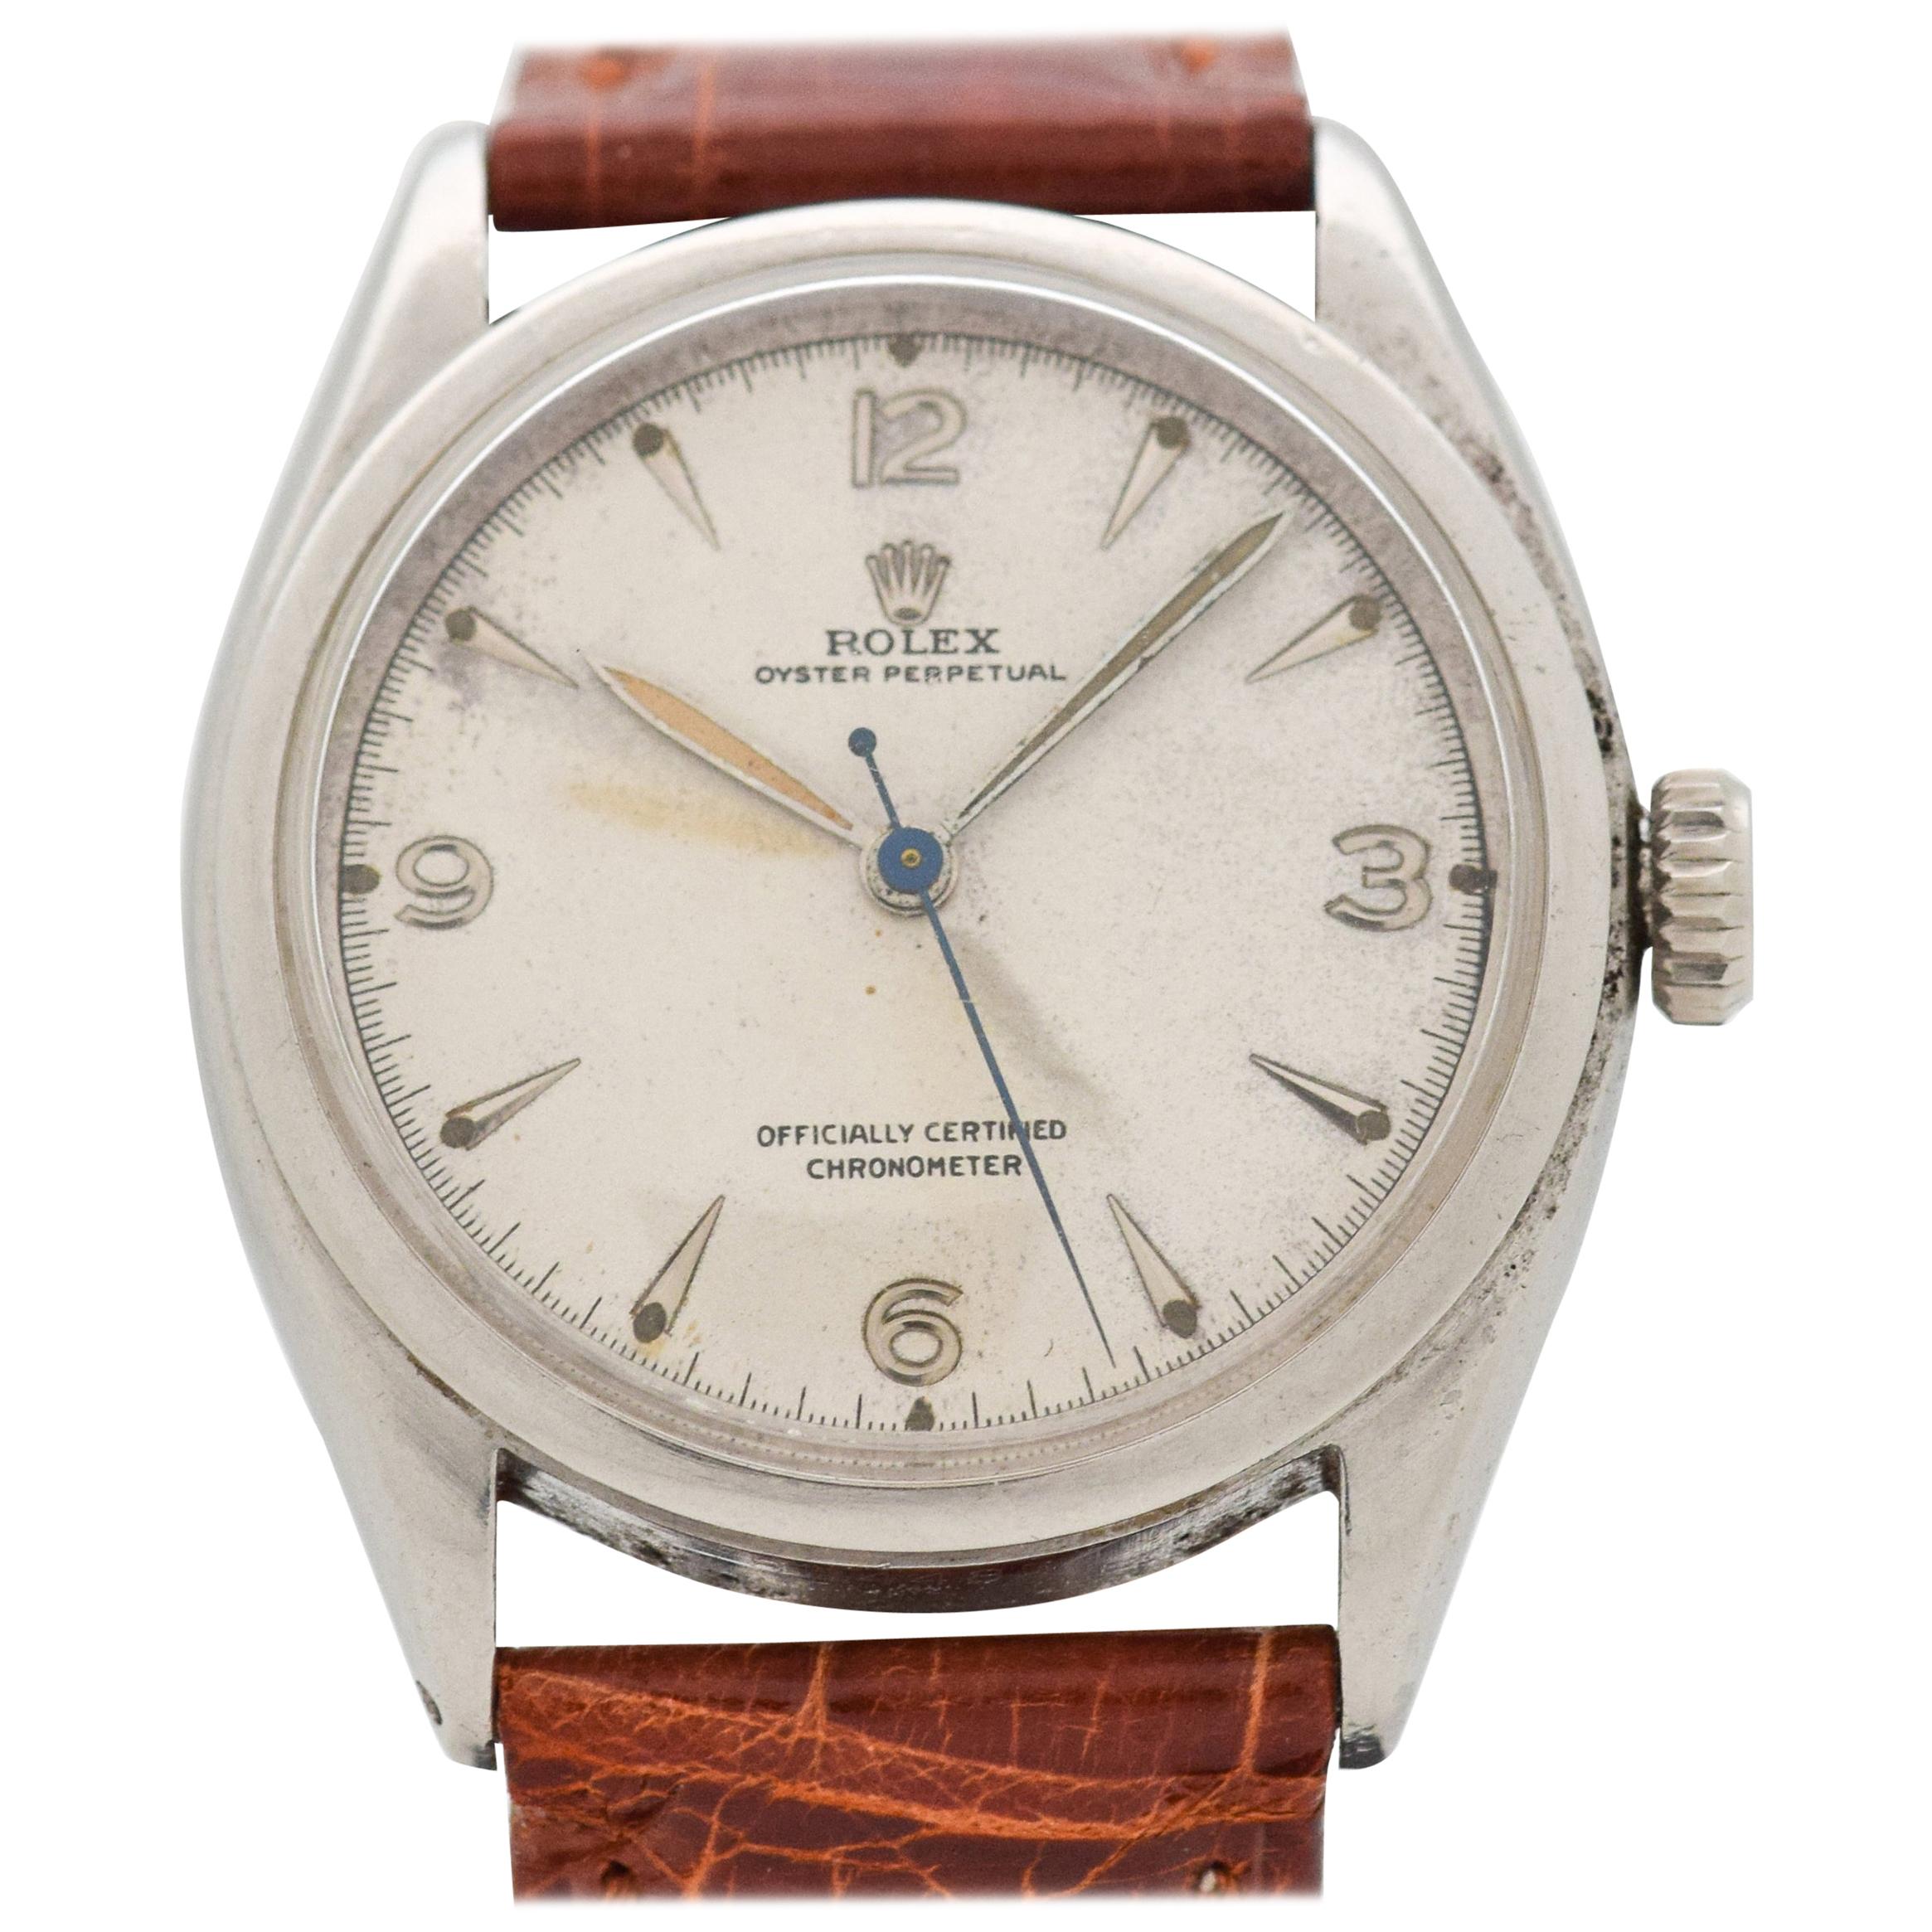 Vintage Rolex Oyster Perpetual Reference 6084 Stainless Steel Watch, 1952 For Sale